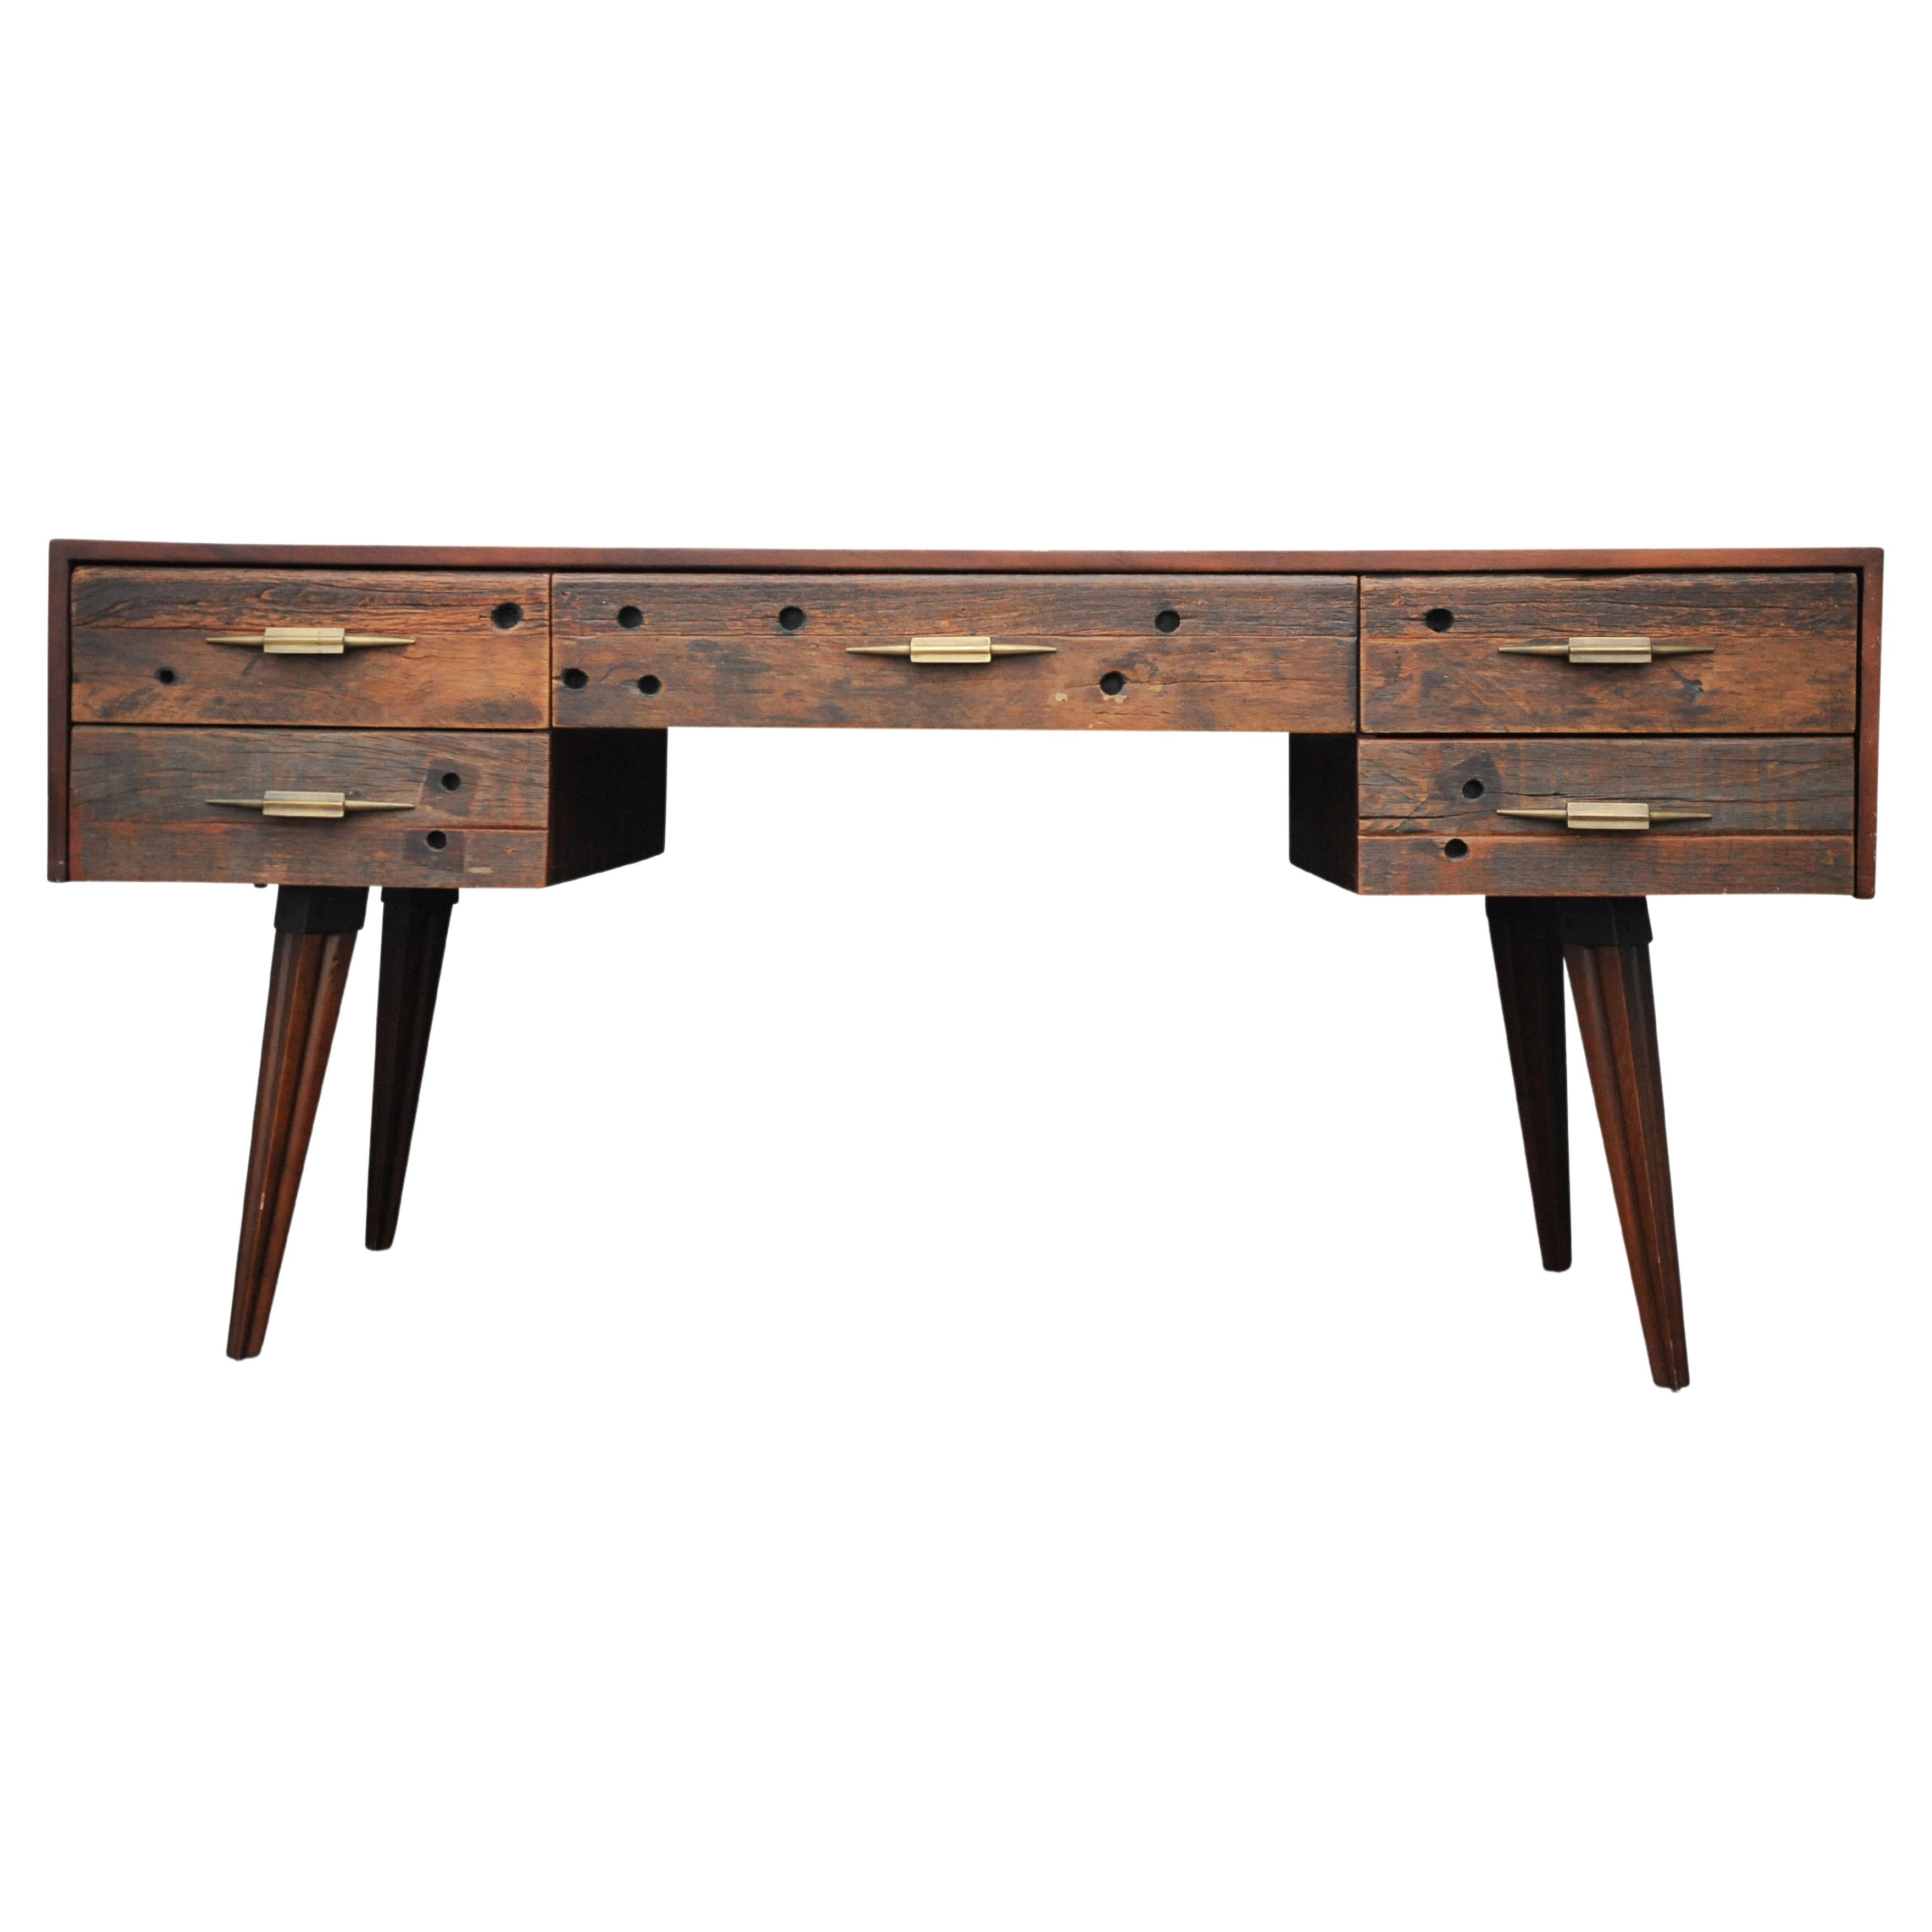 British Hardwood and Reclaimed Timber Desk Befit with Five Drawers & Gilded Handles For Sale